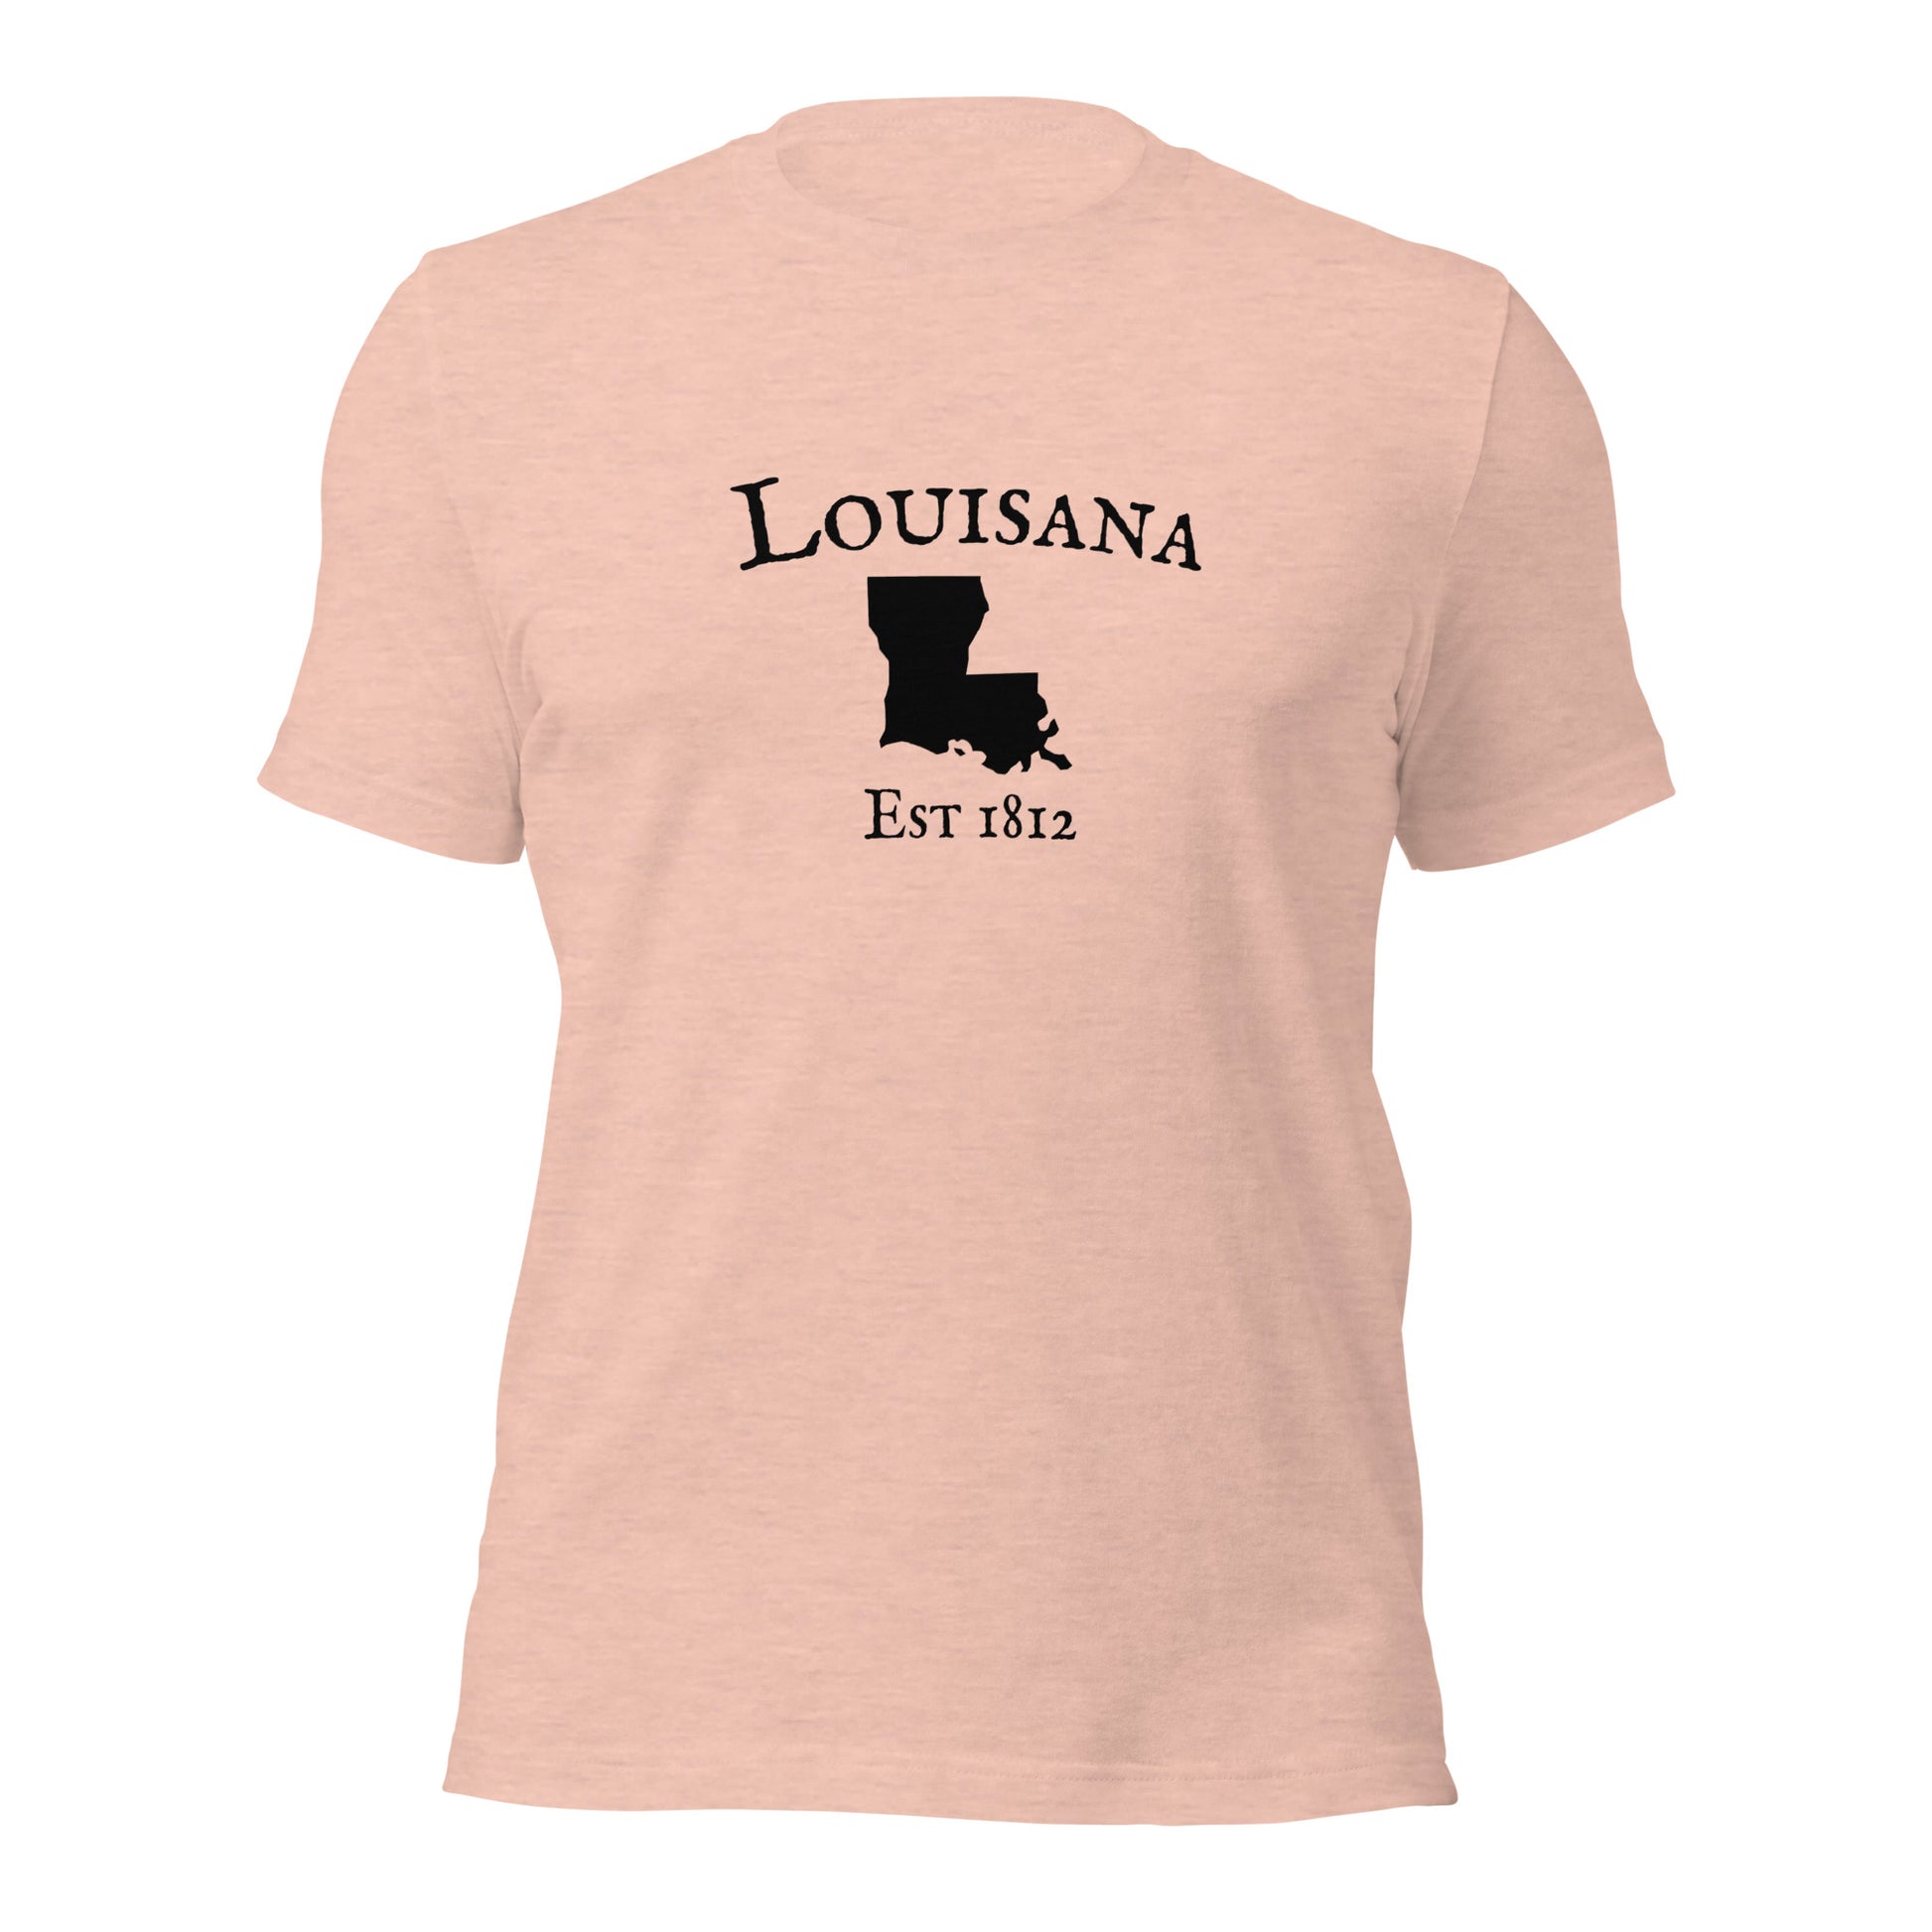 "Louisiana Established In 1812" T-Shirt - Weave Got Gifts - Unique Gifts You Won’t Find Anywhere Else!